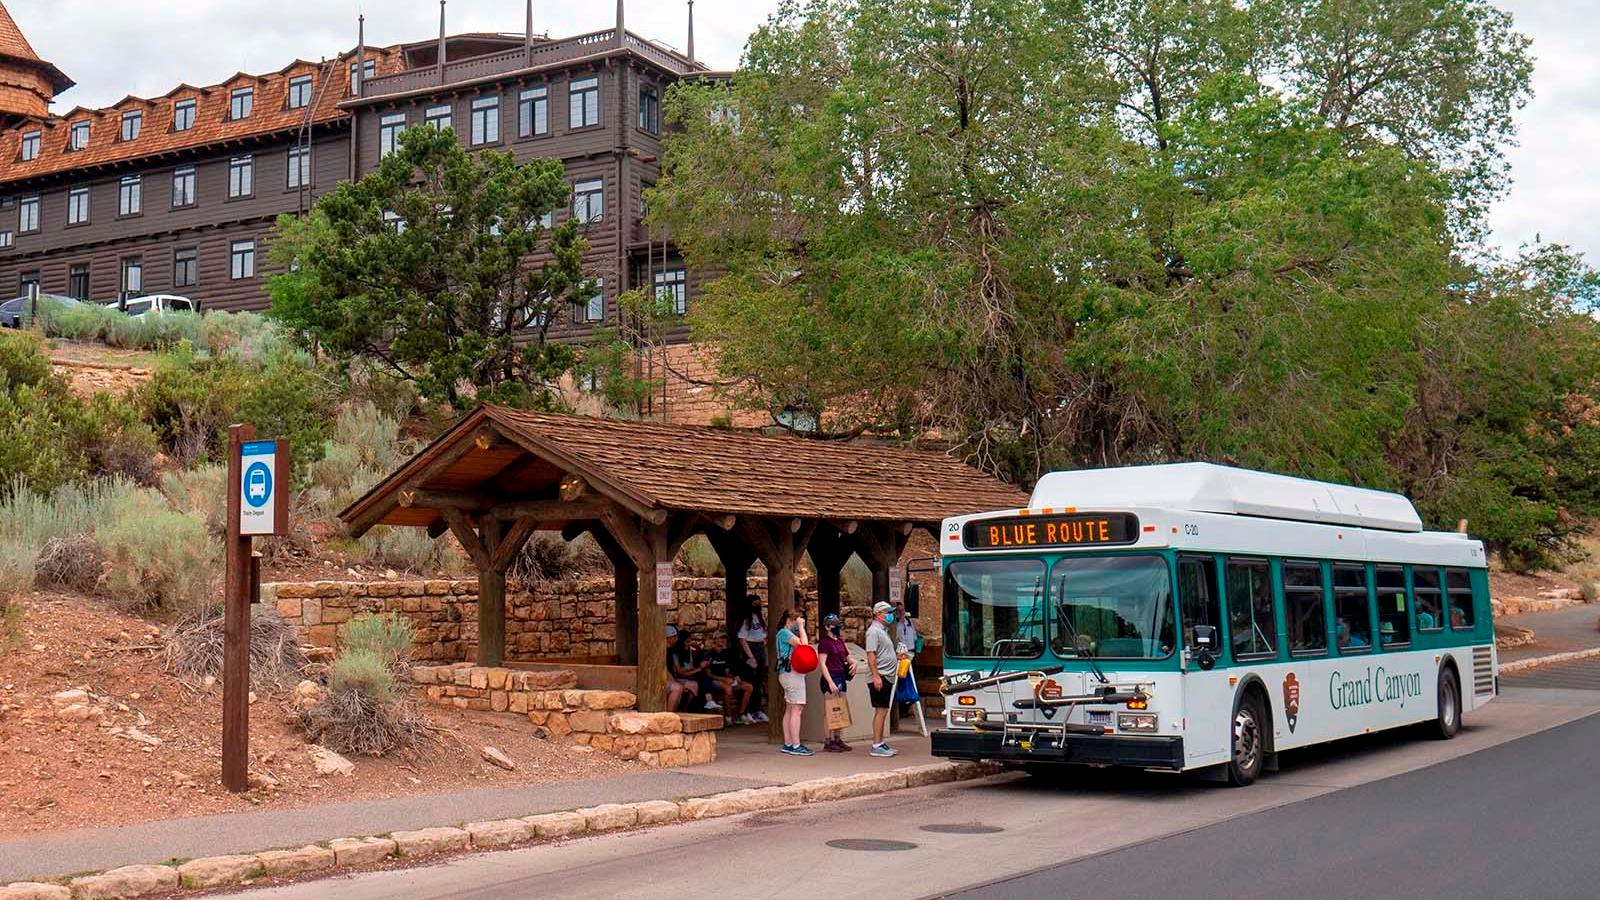 People are boarding a white bus at a shelter built into a hillside below a rustic hotel.